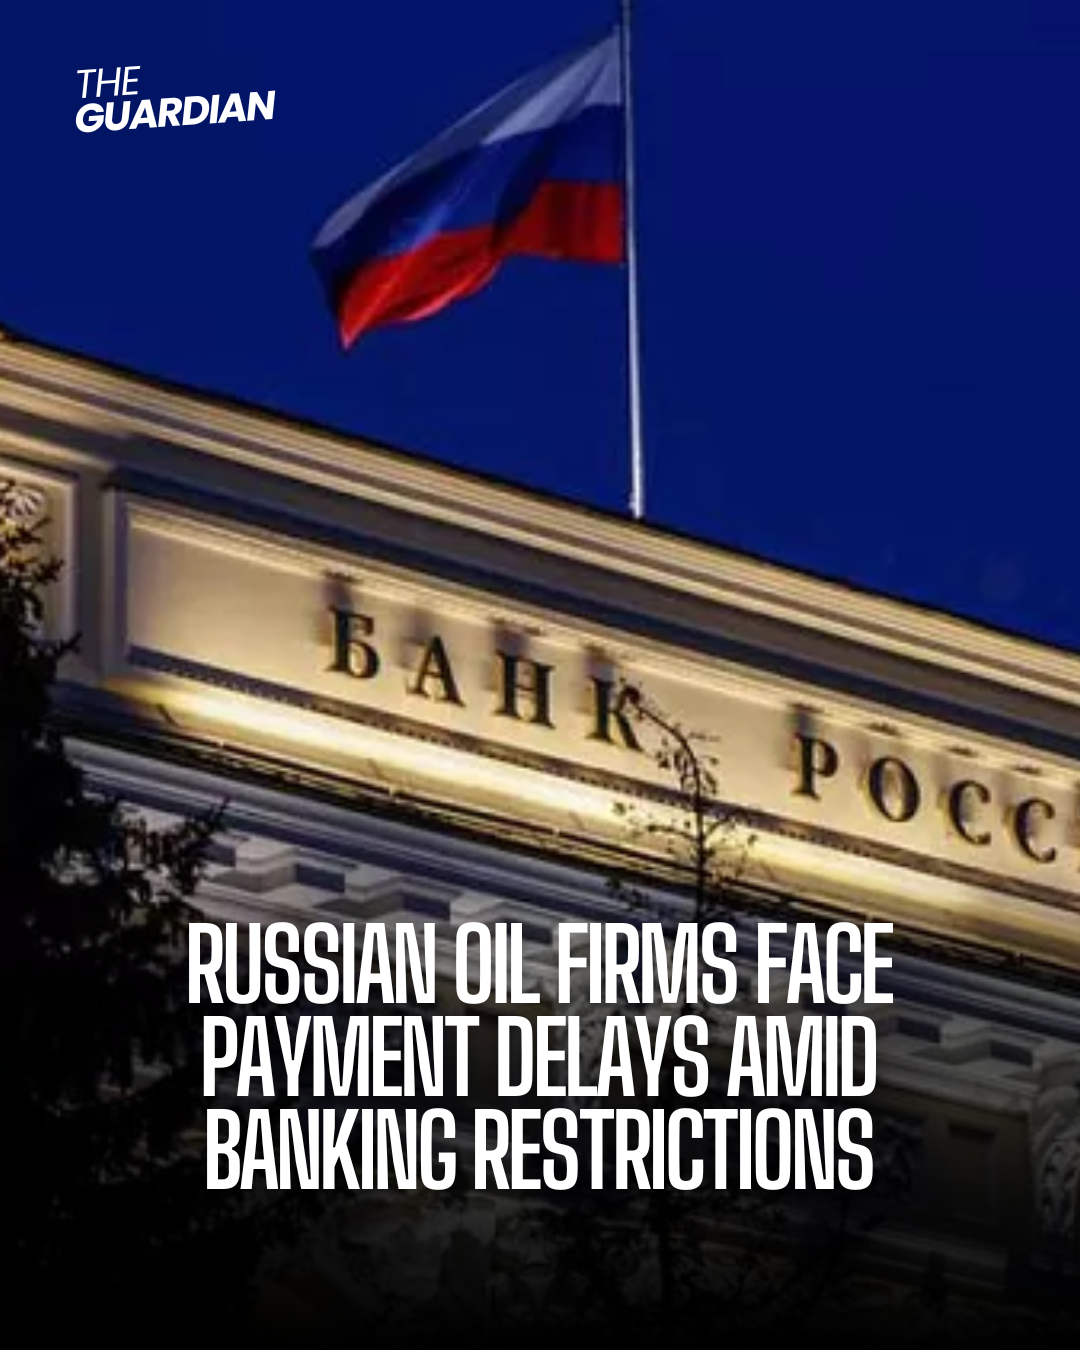 Russian oil businesses have been experiencing payment delays for crude and fuel for several months.